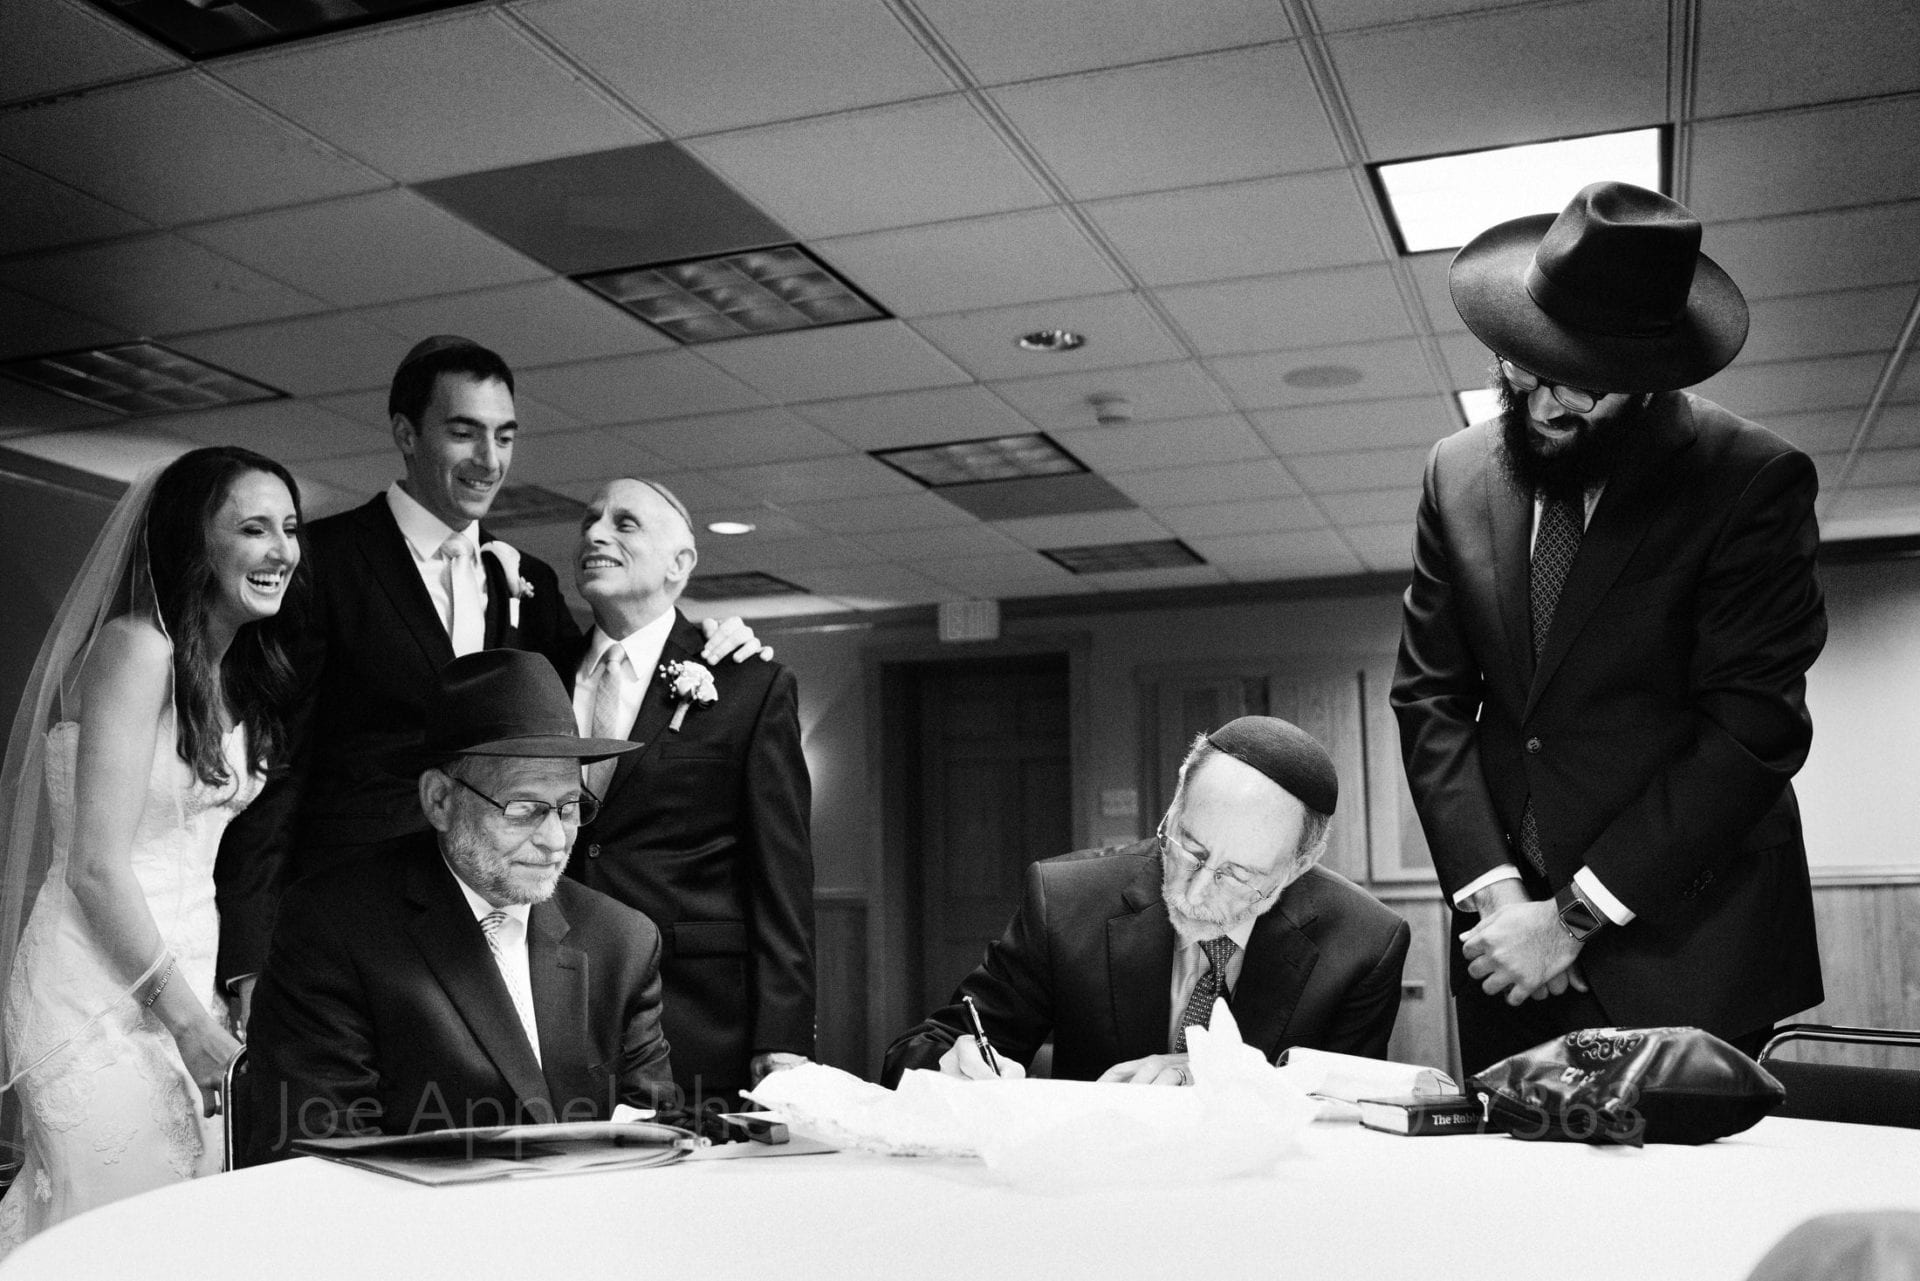 Rabbis seated at a table sign paperwork for a couple during their marriage ceremony. The couple stands behind them along with the bride's father.